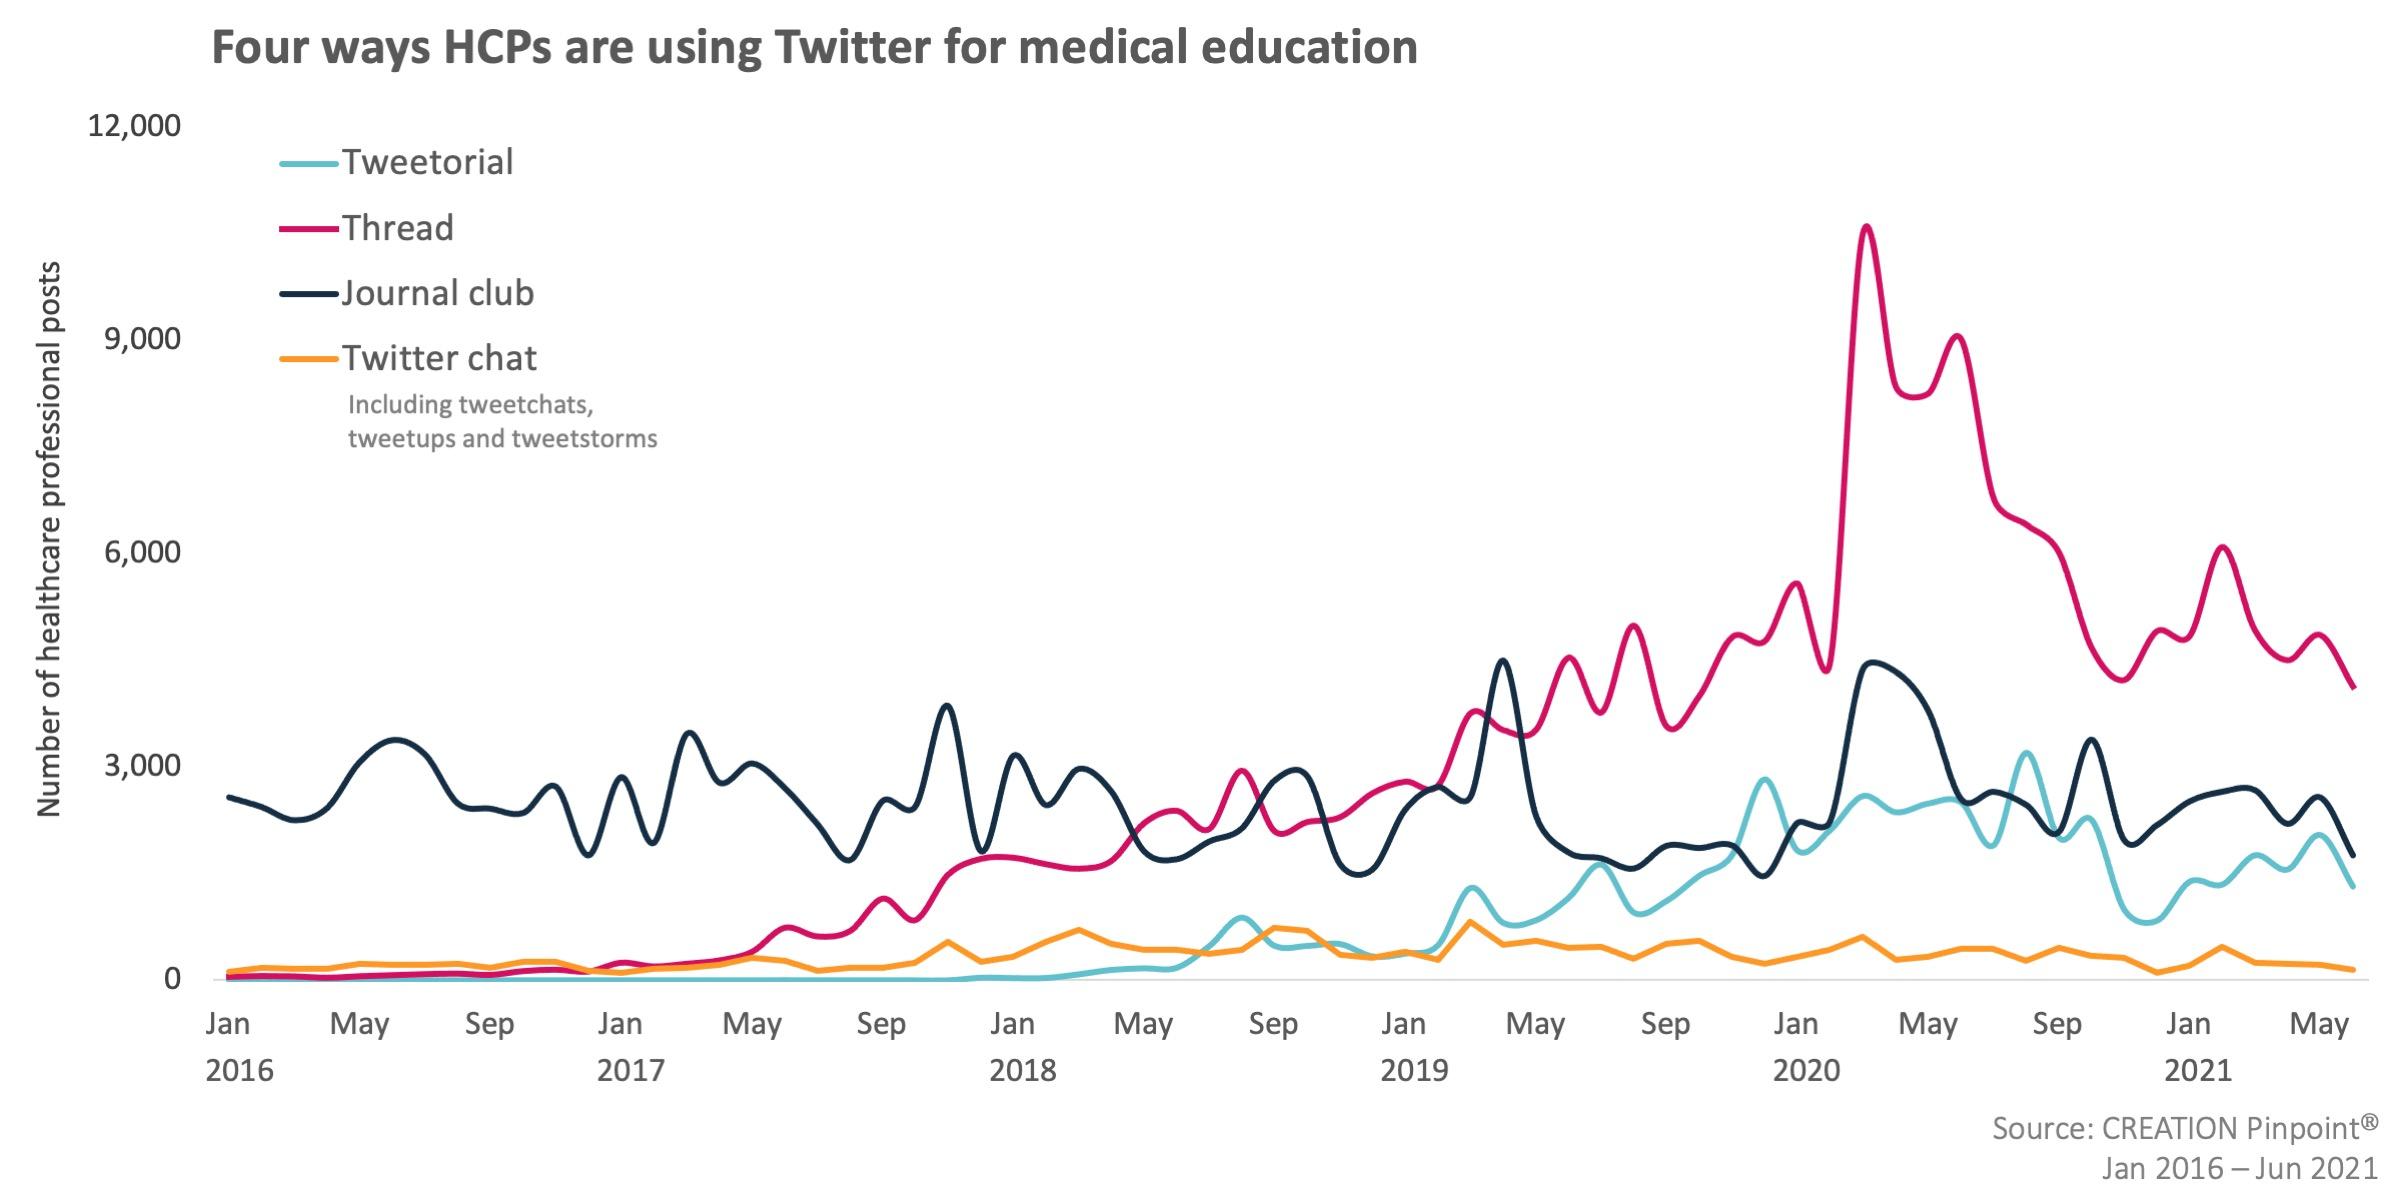 Graph showing four ways healthcare professionals are using Twitter for medical education